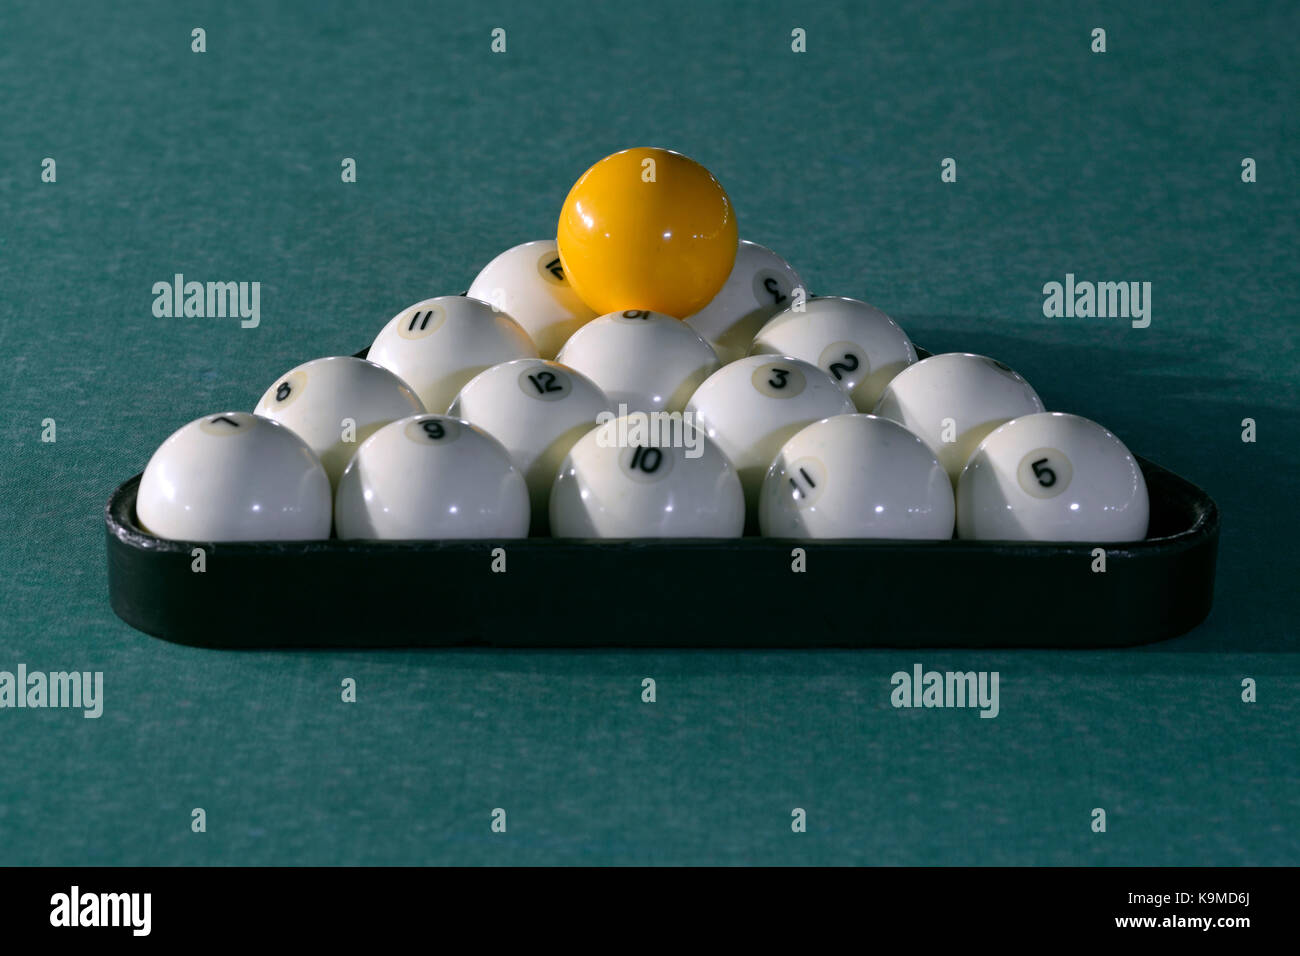 Billiard. Setting up the balls for the beginning of game Stock Photo